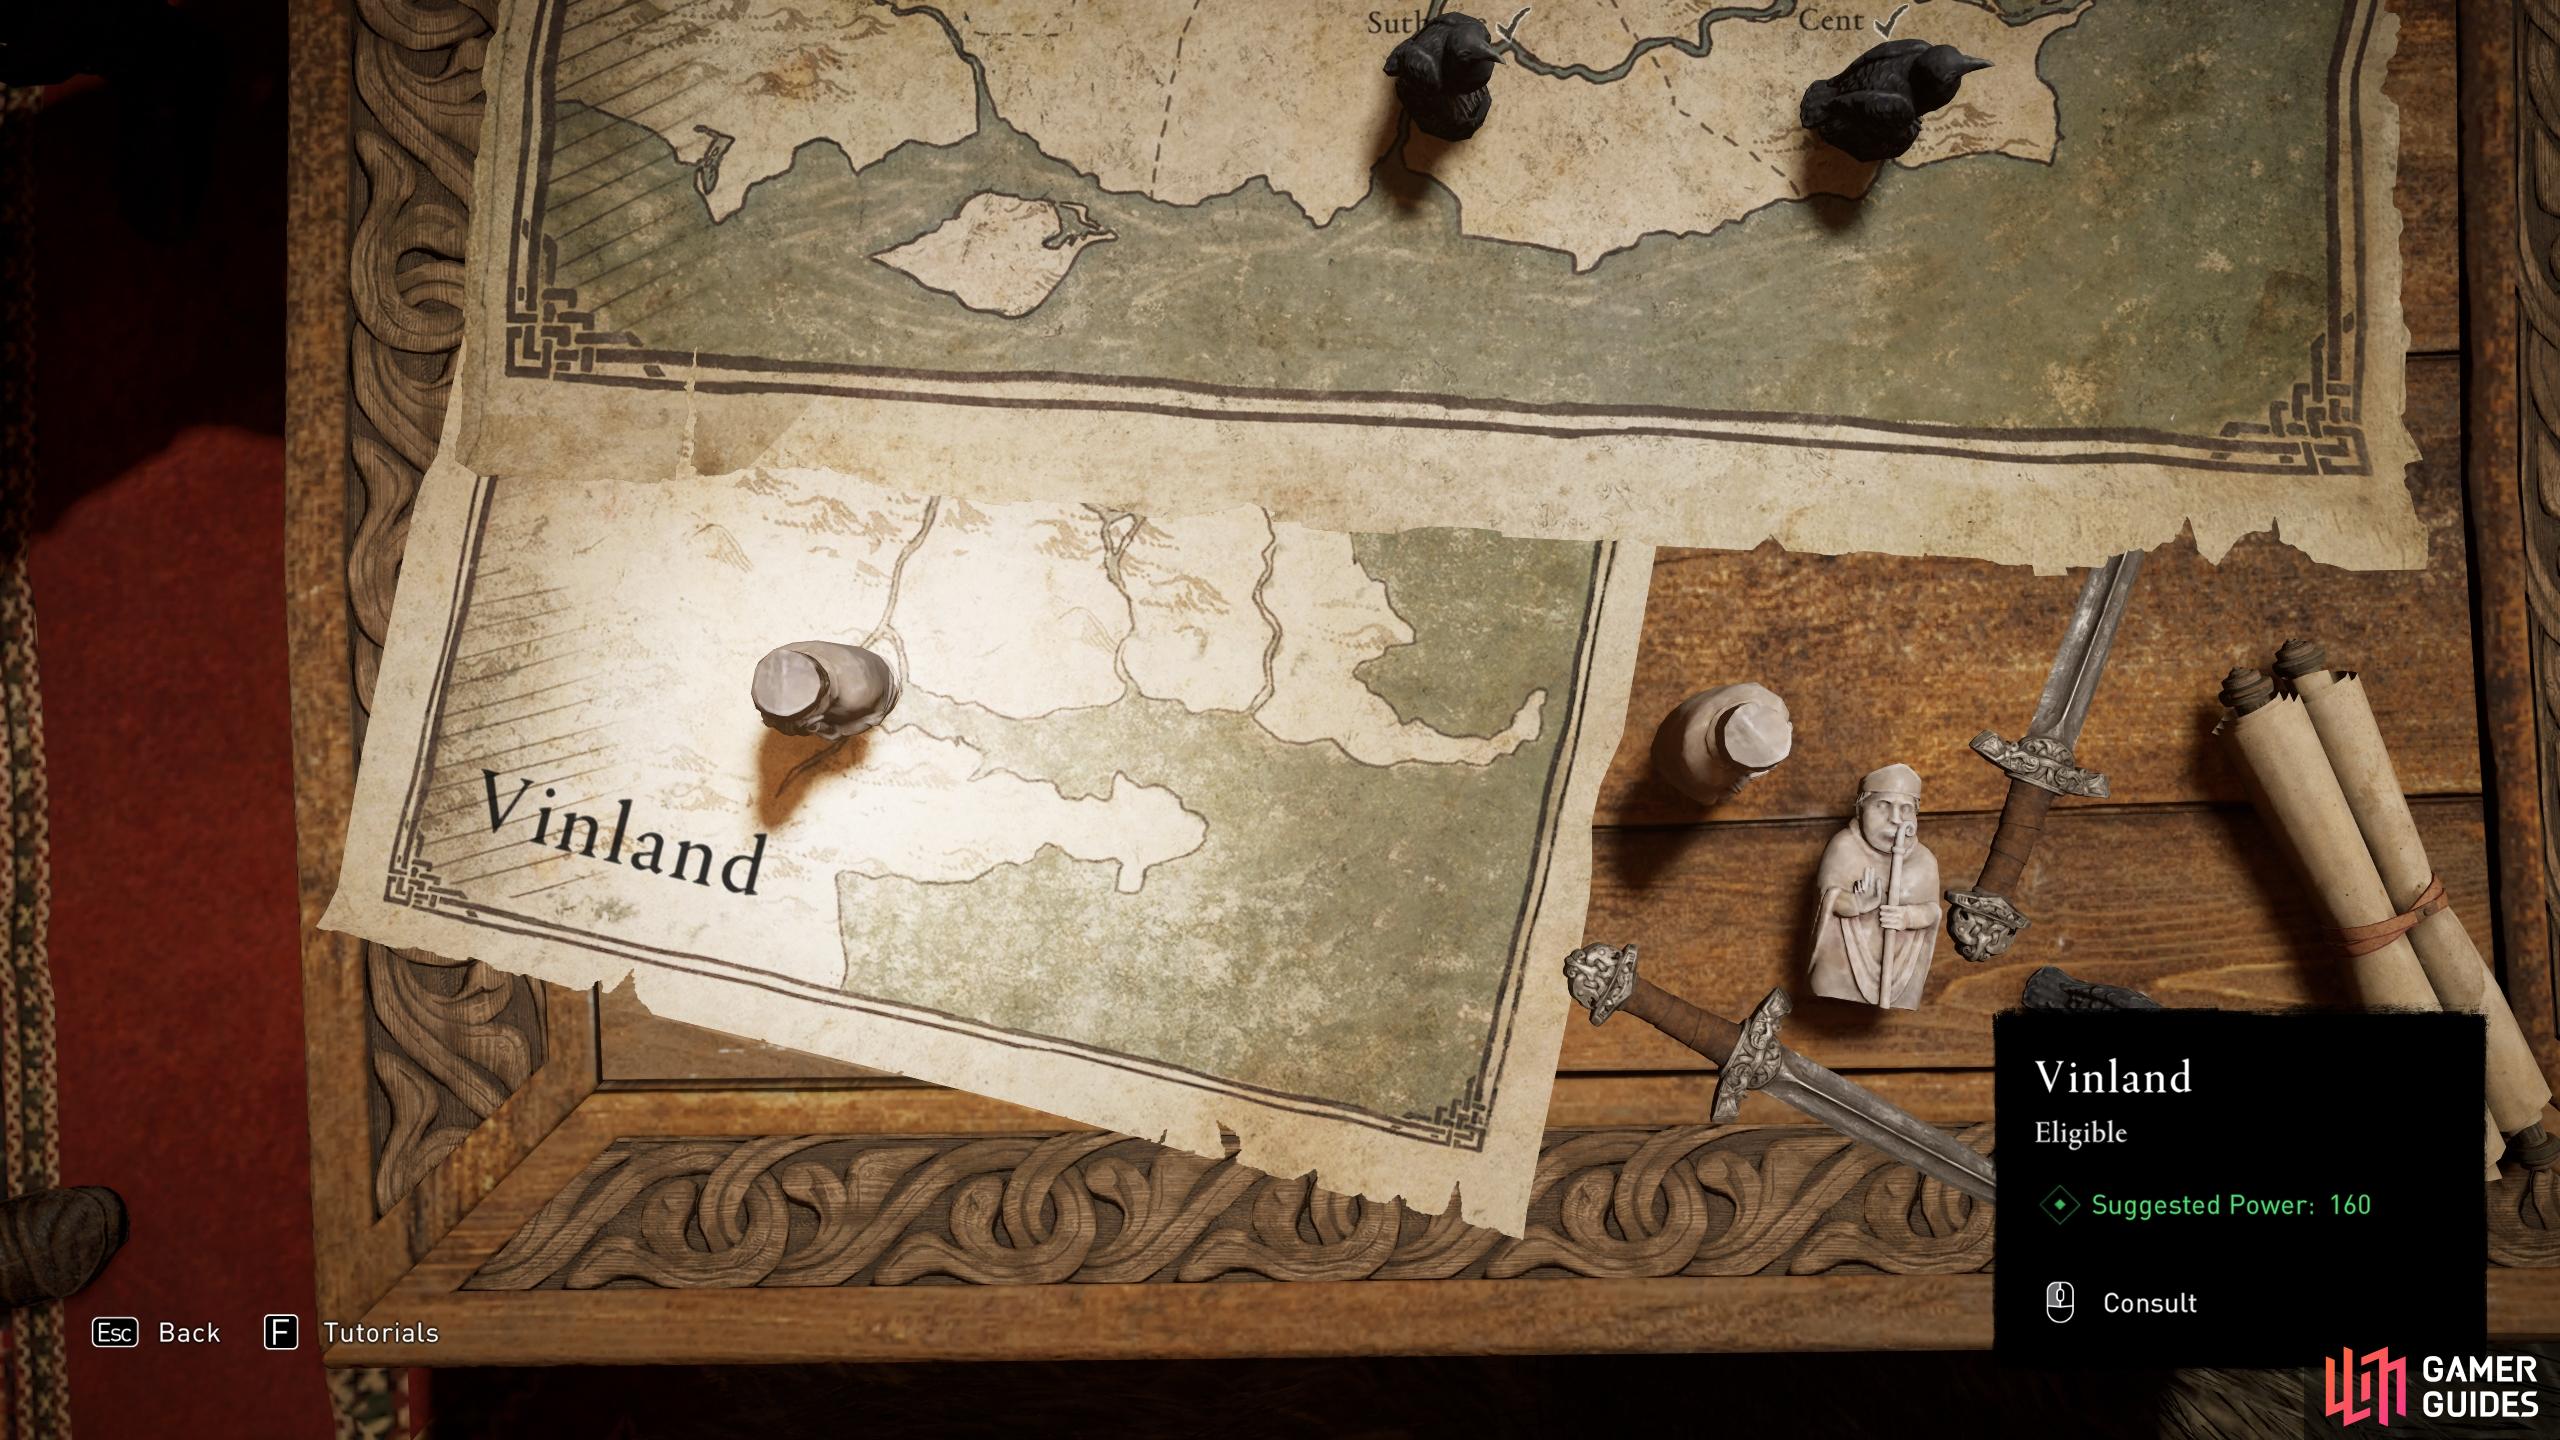 You will find the region of Vinland at the bottom of the Alliance Map once you've unlocked In a Strange Land.